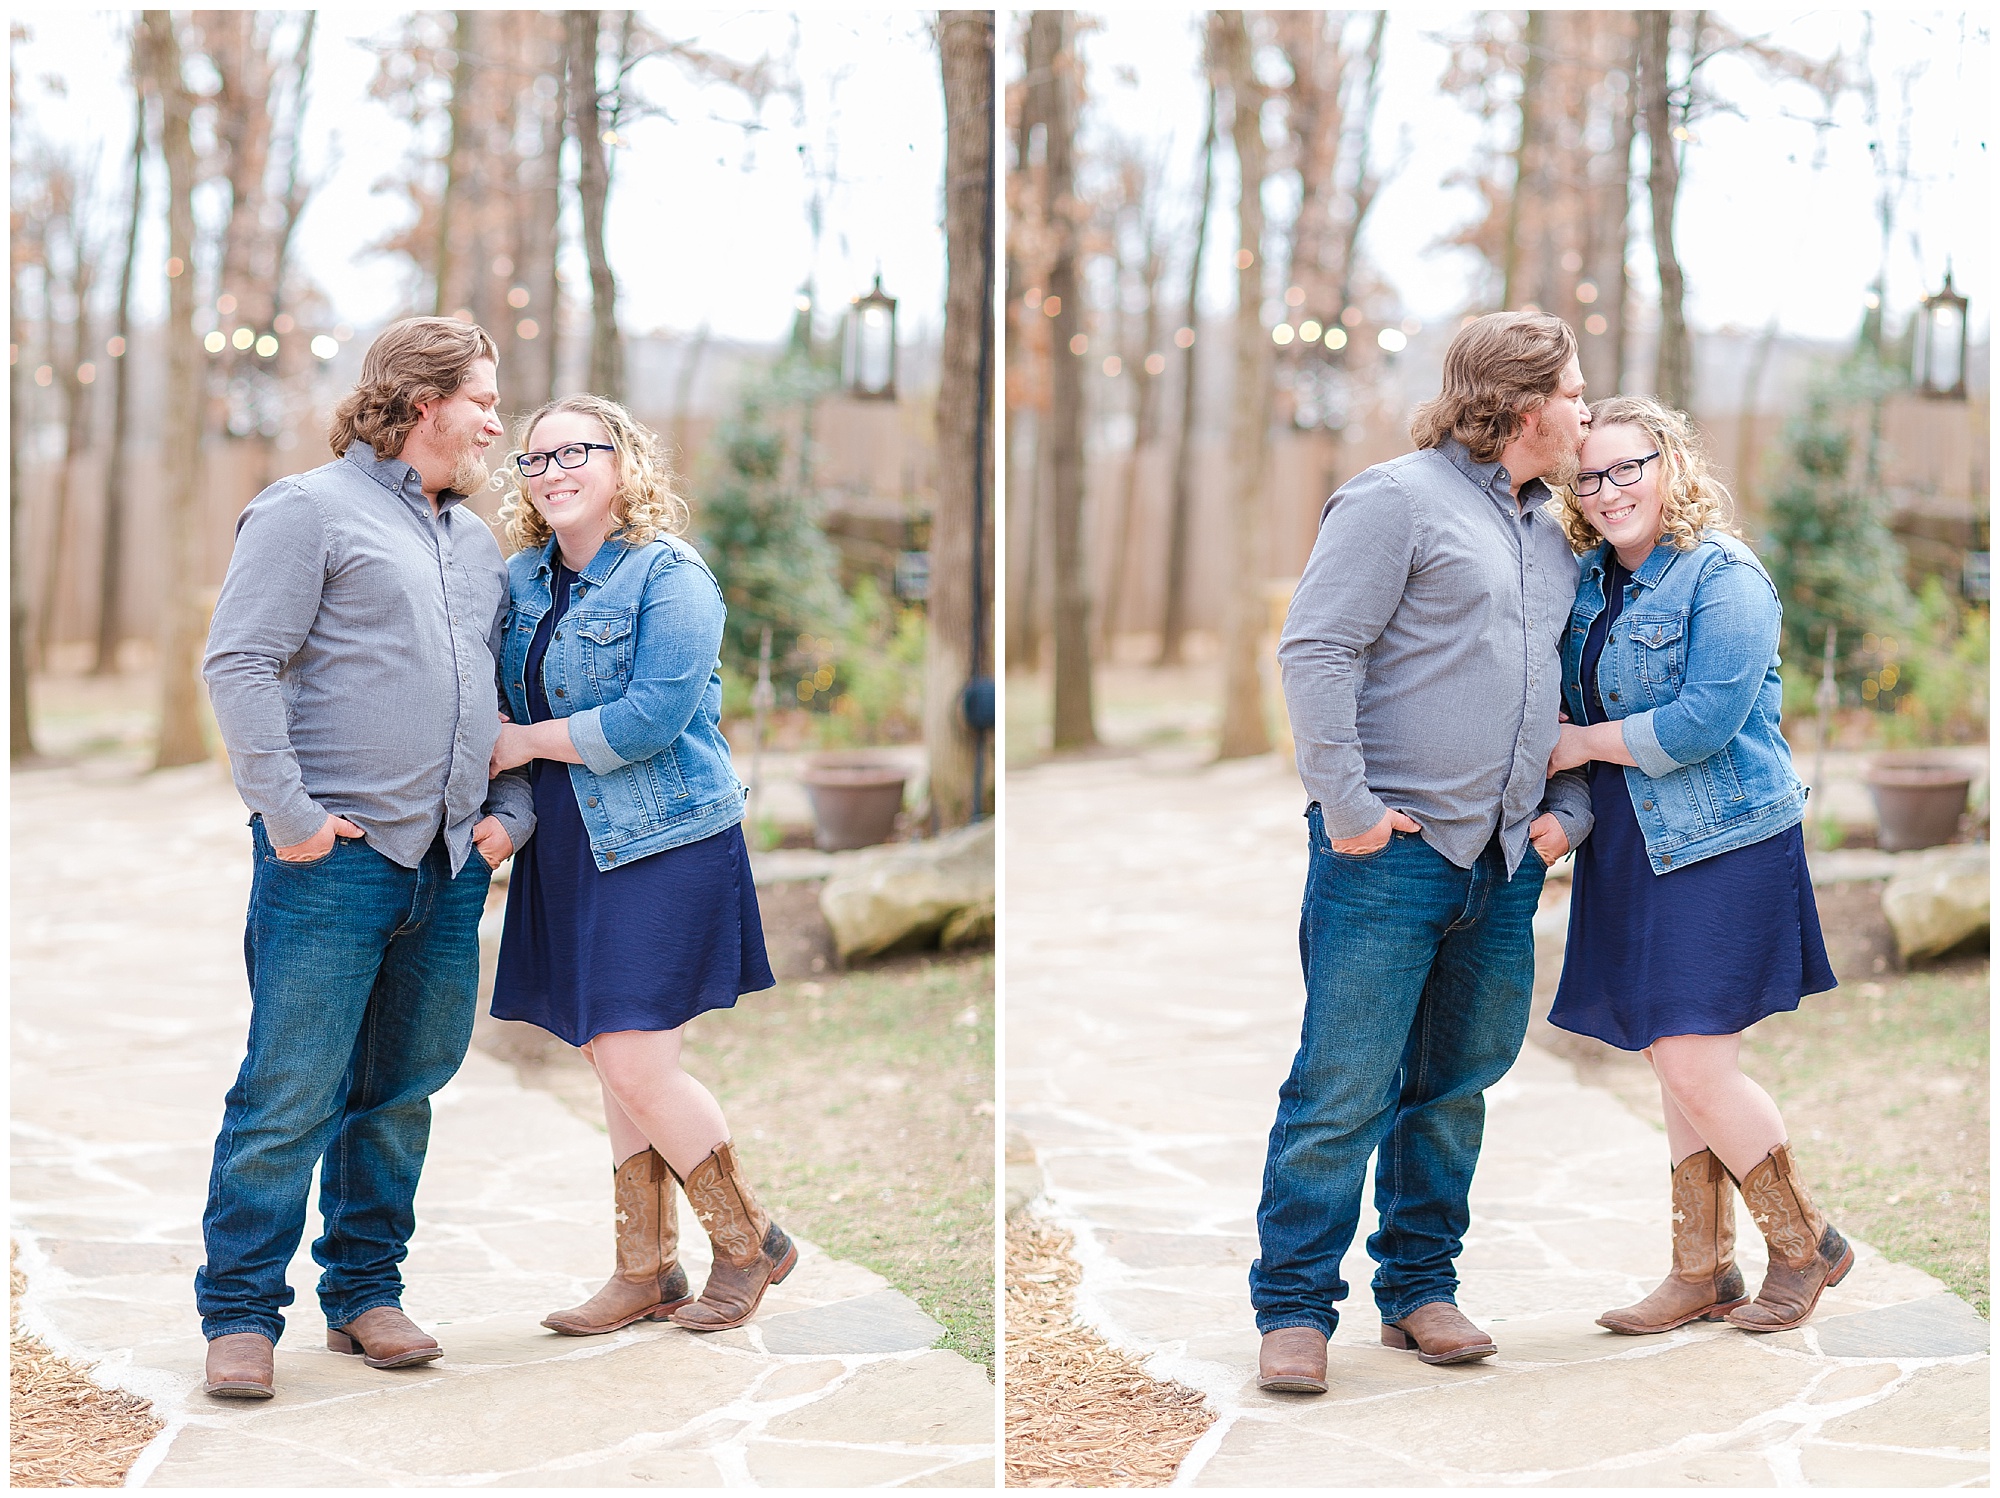 Lauren and Caleb engagement session